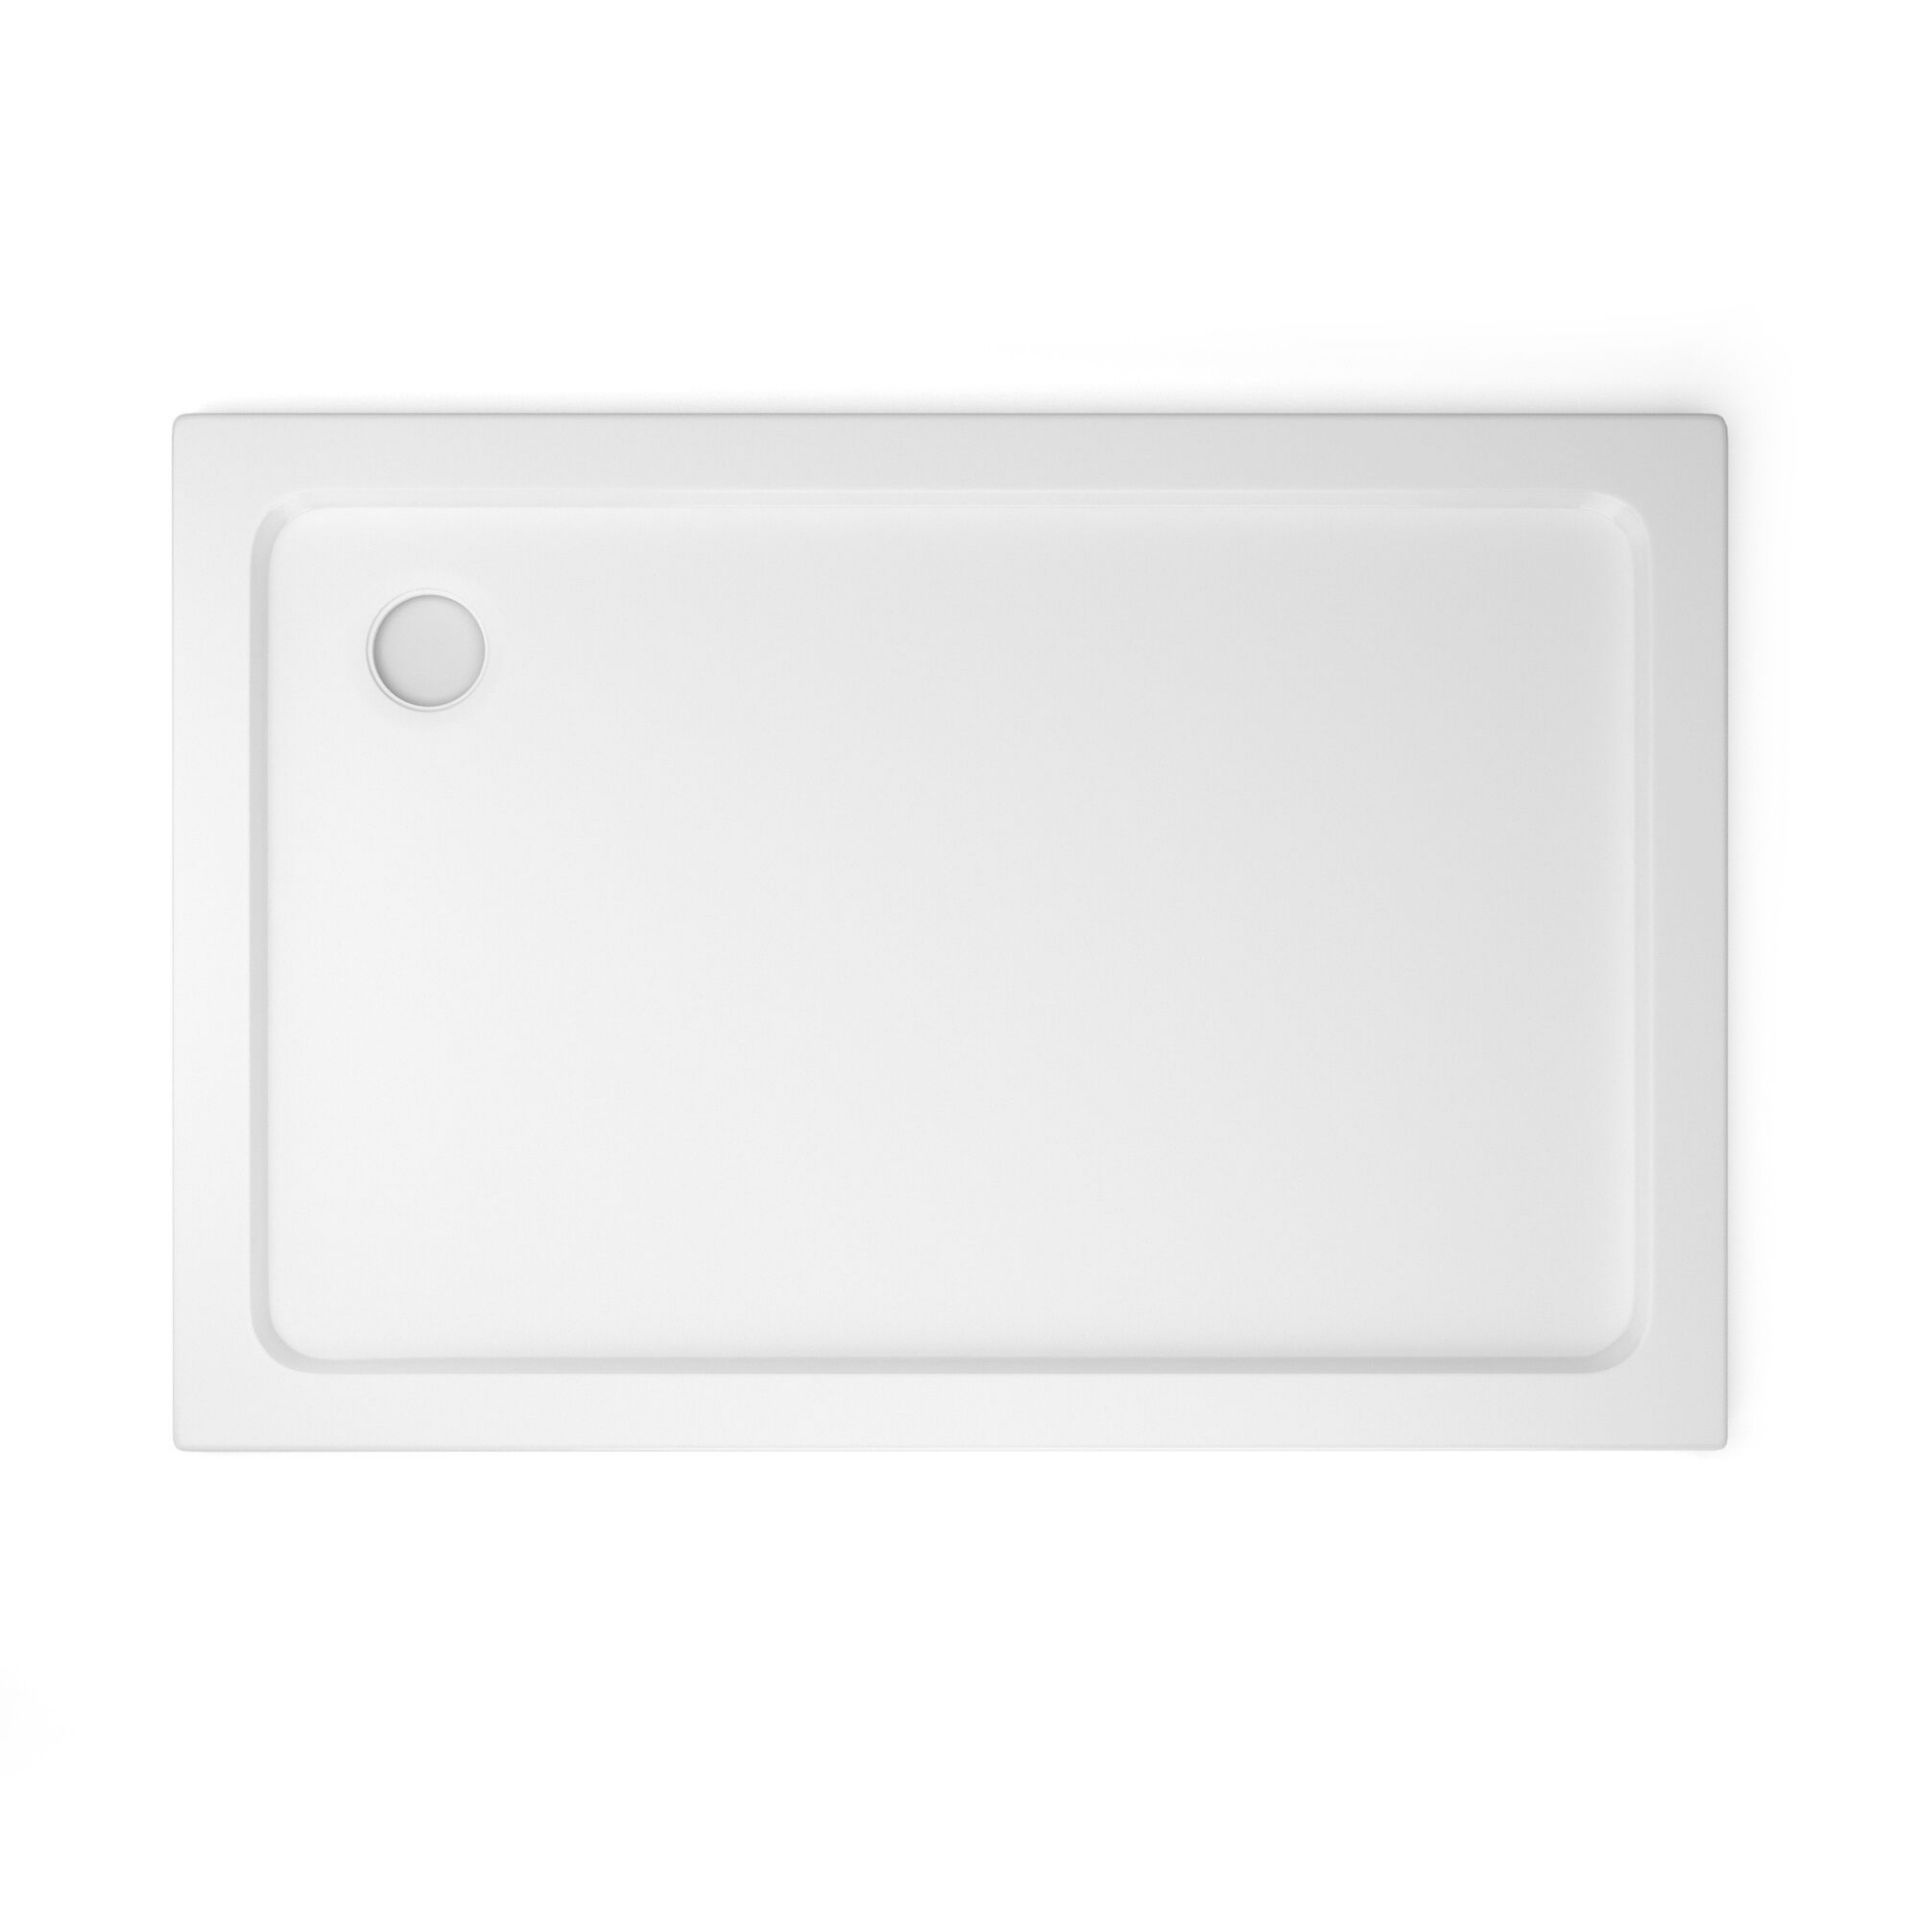 (TT139) 1200x800mm Rectangular Ultra Slim Shower Tray. RRP £334.99. Constructed from acrylic c...